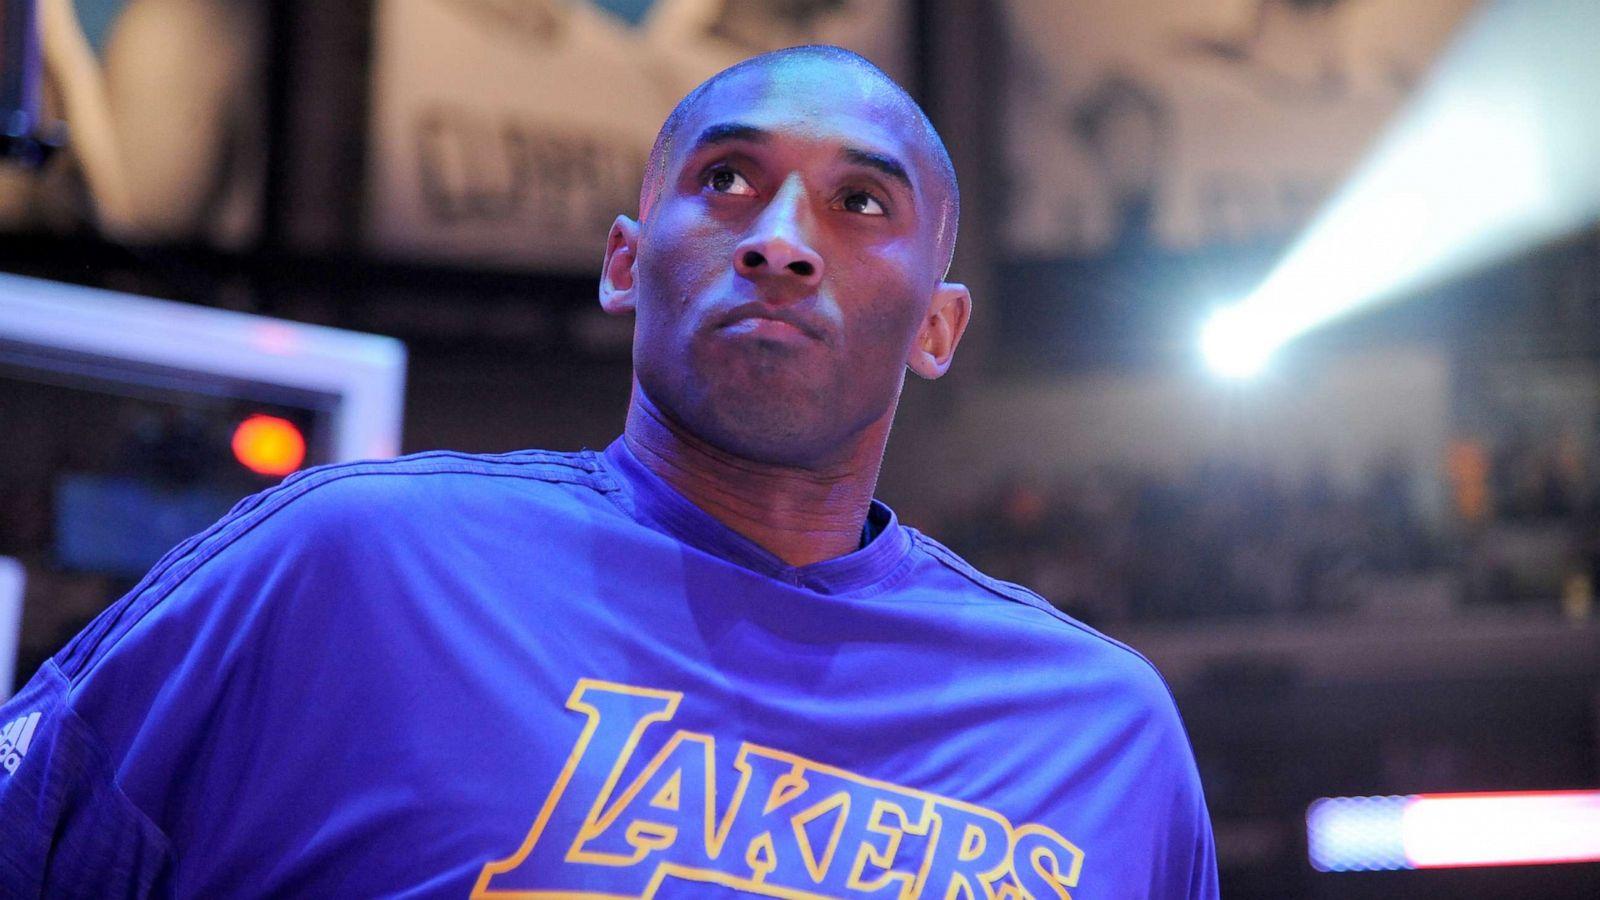 Celebrity fans pay homage to NBA legend Kobe Bryant after he